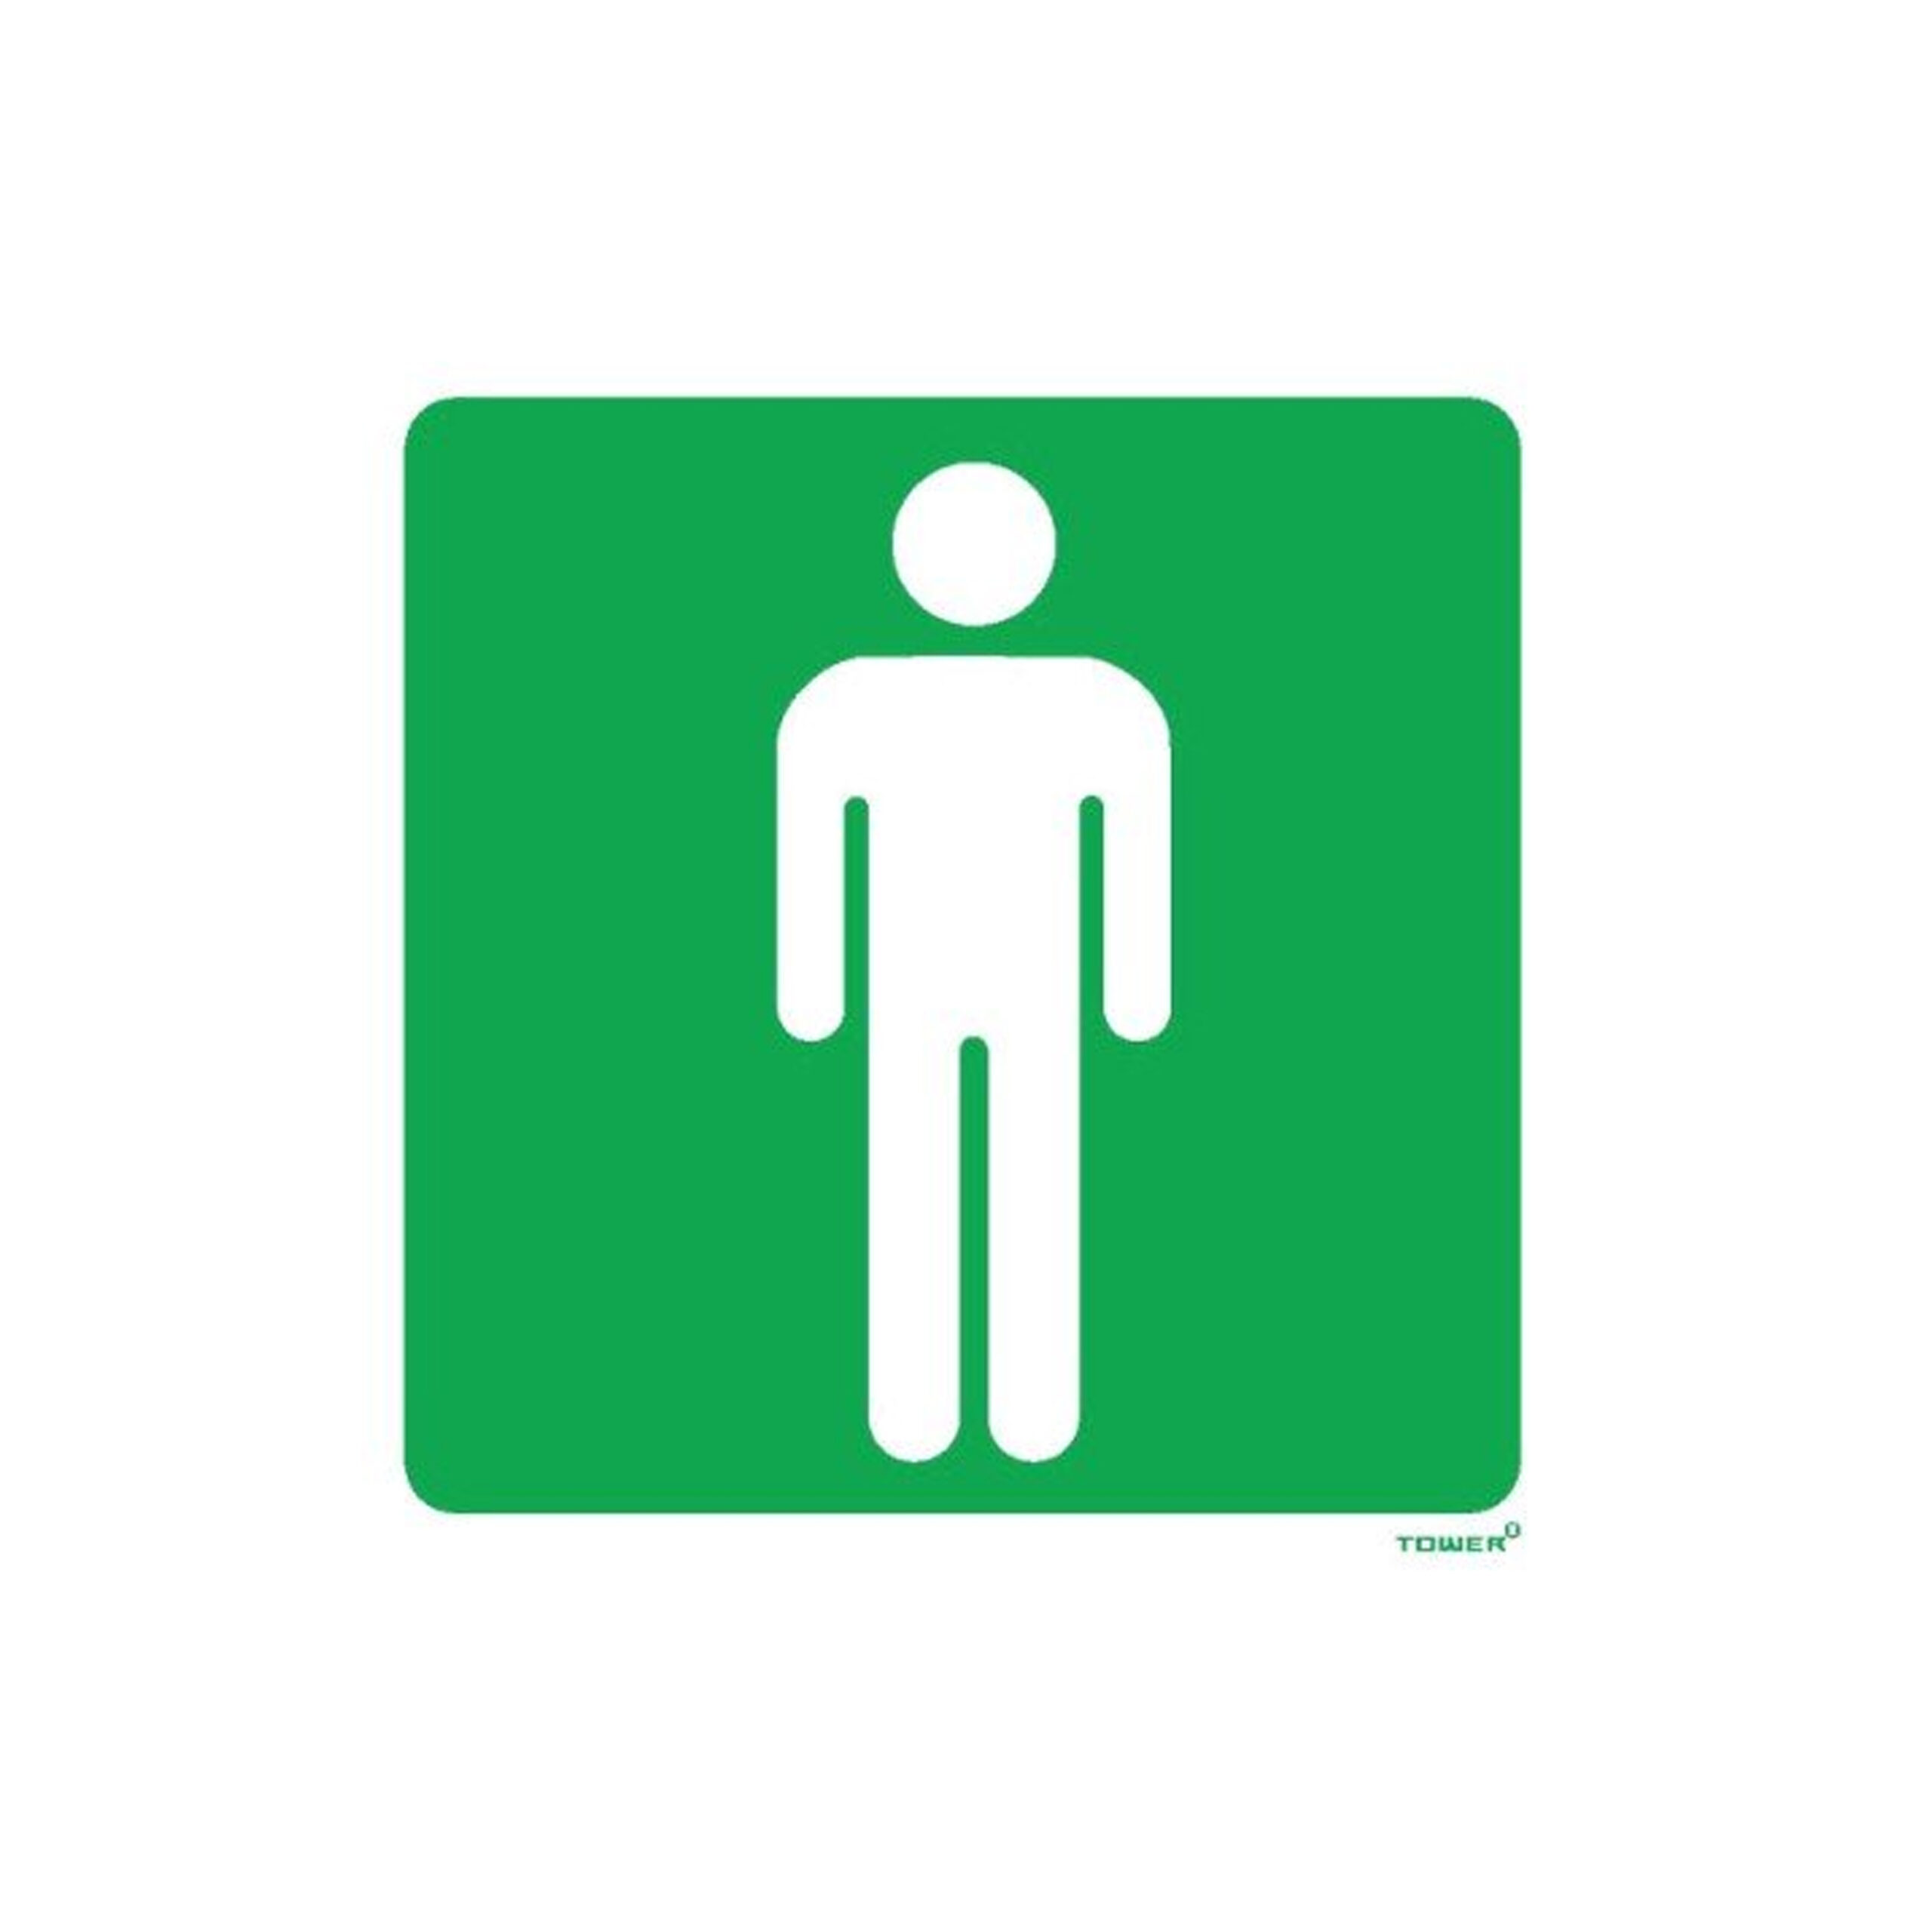 TOWER  "MENS
TOILET" SIGNAGE 
150x150mm